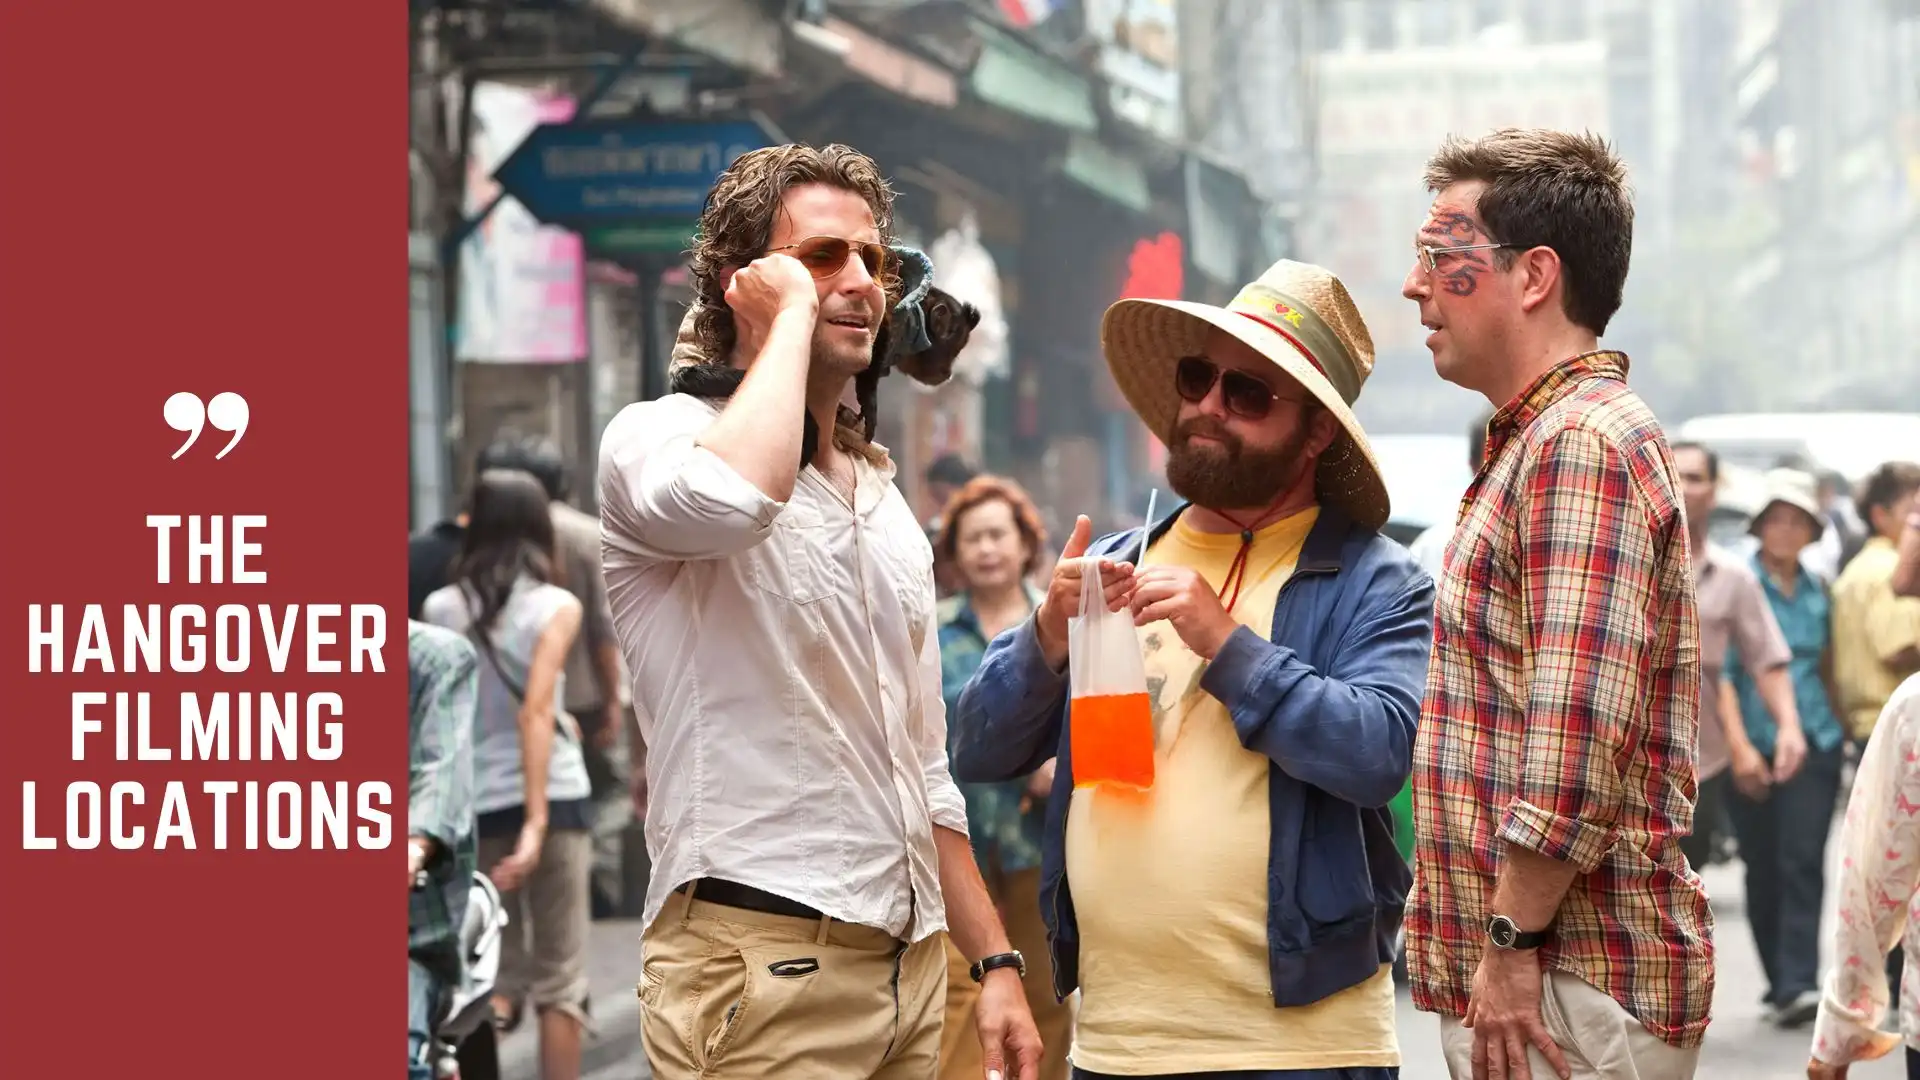 The Hangover Filming Locations (Image credit: lwlies)